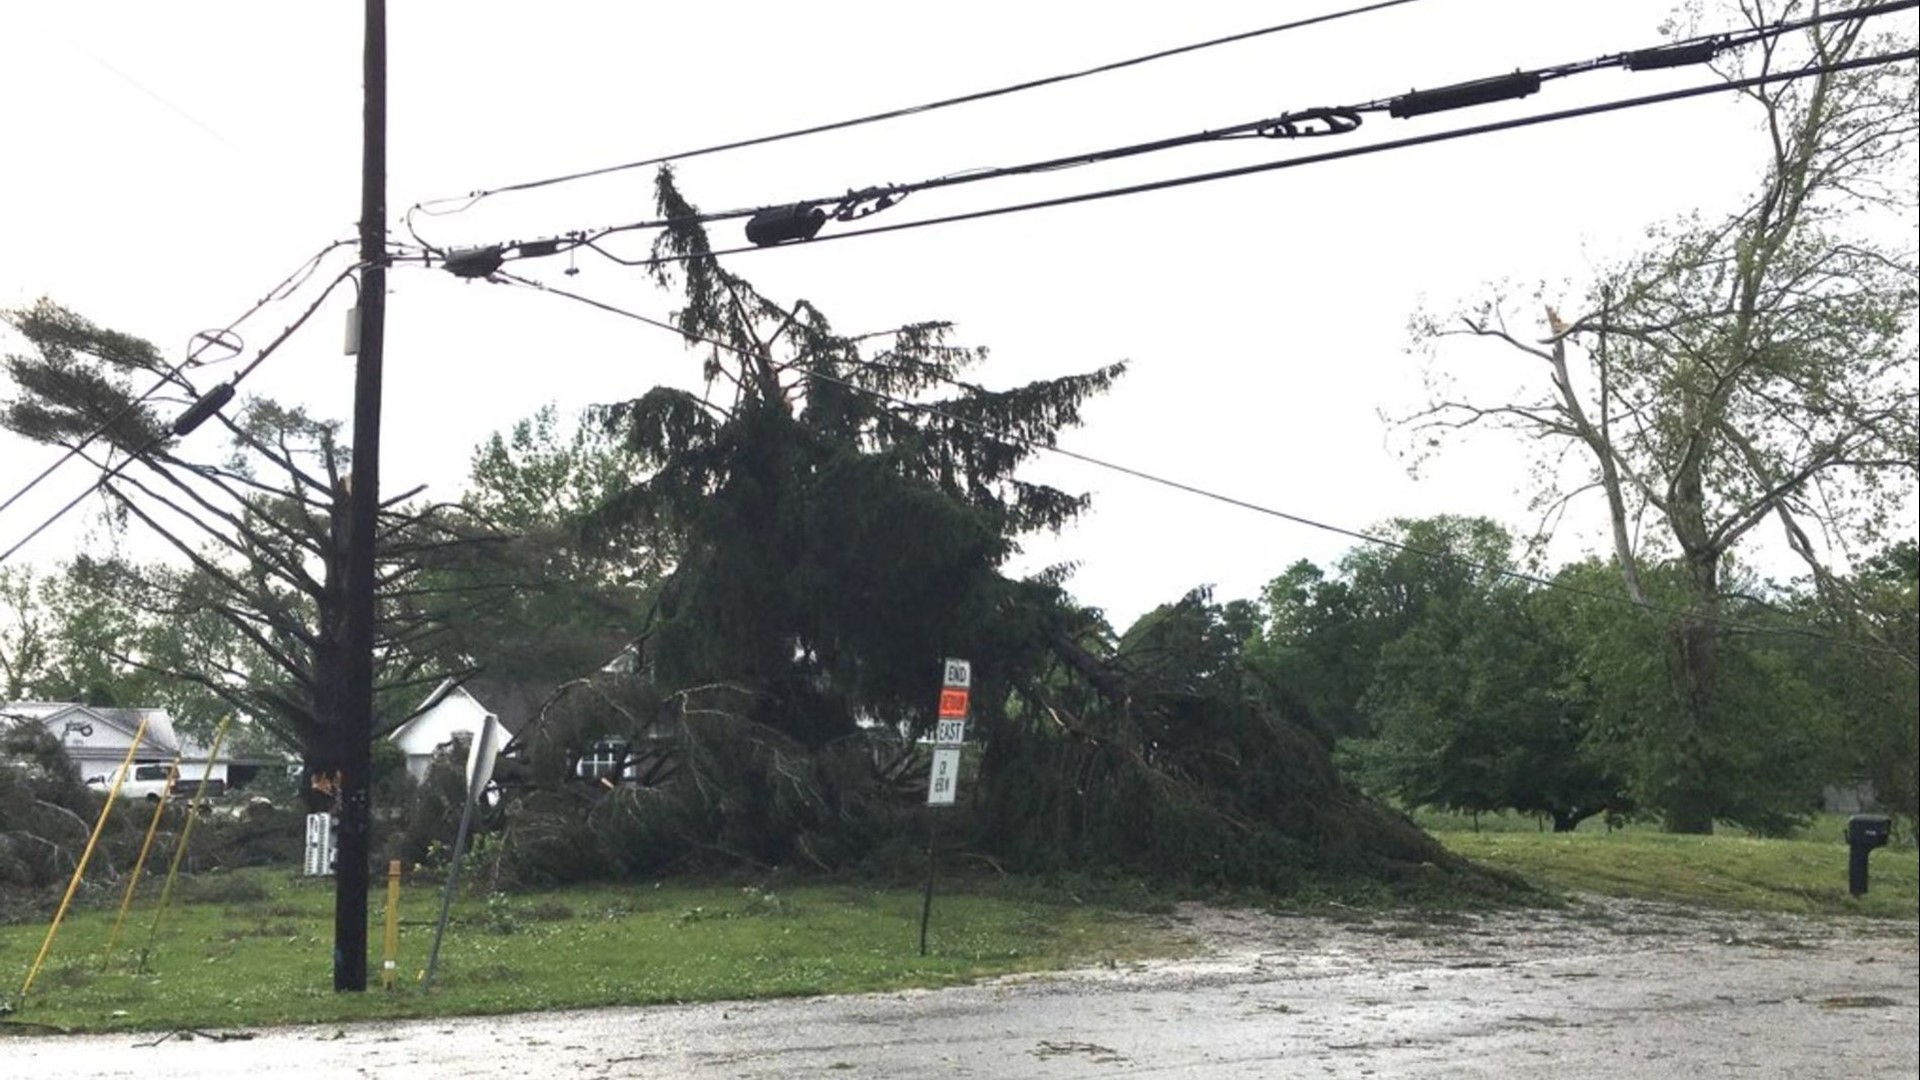 Duke Energy said power is expected to be restored to most customers by midnight, but in the hardest-hit areas around Columbus, restoration may continue into Monday.